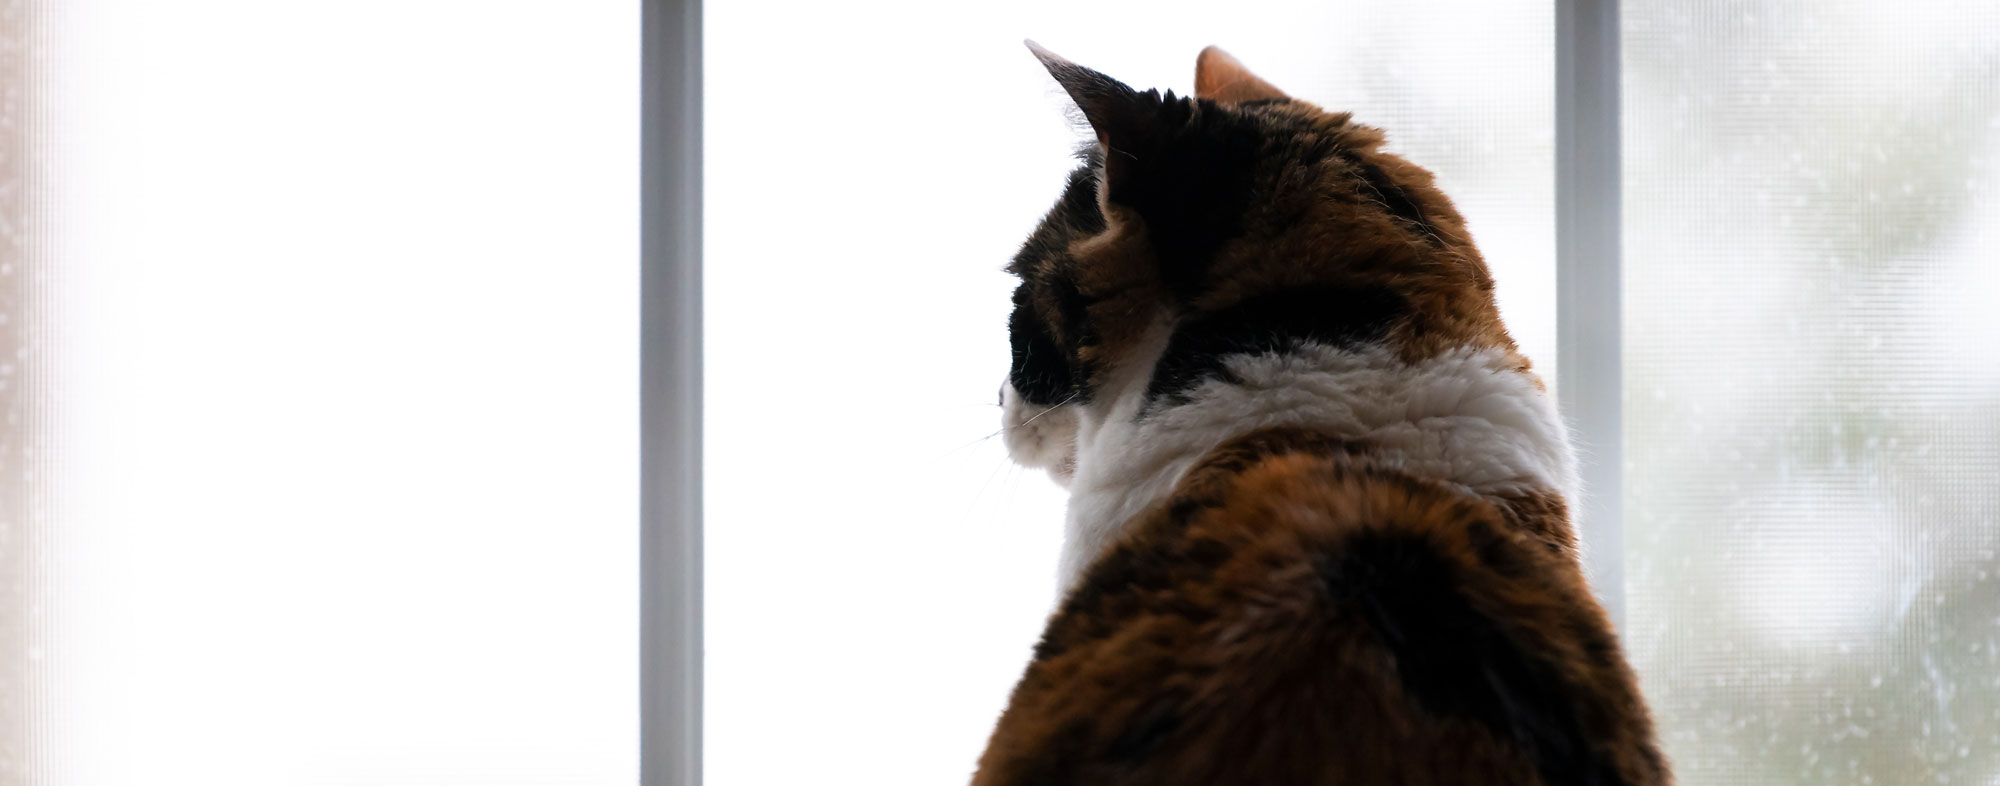 Indoor cats appreciate windows and other forms of stimulation